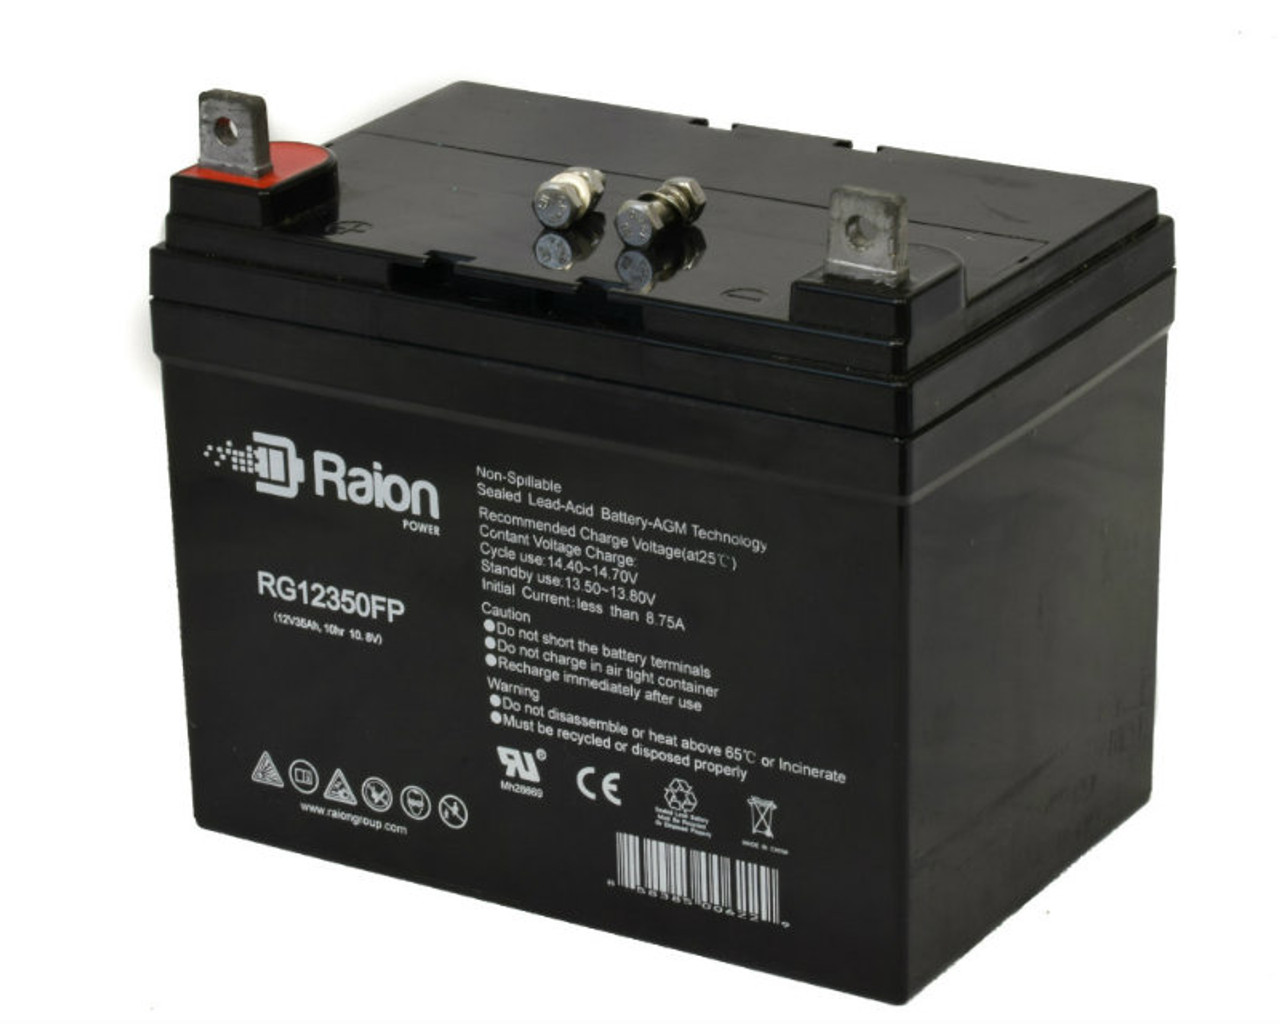 Raion Power Replacement 12V 35Ah RG12350FP Mobility Scooter Battery for Ortho-Kinetics Lark XT